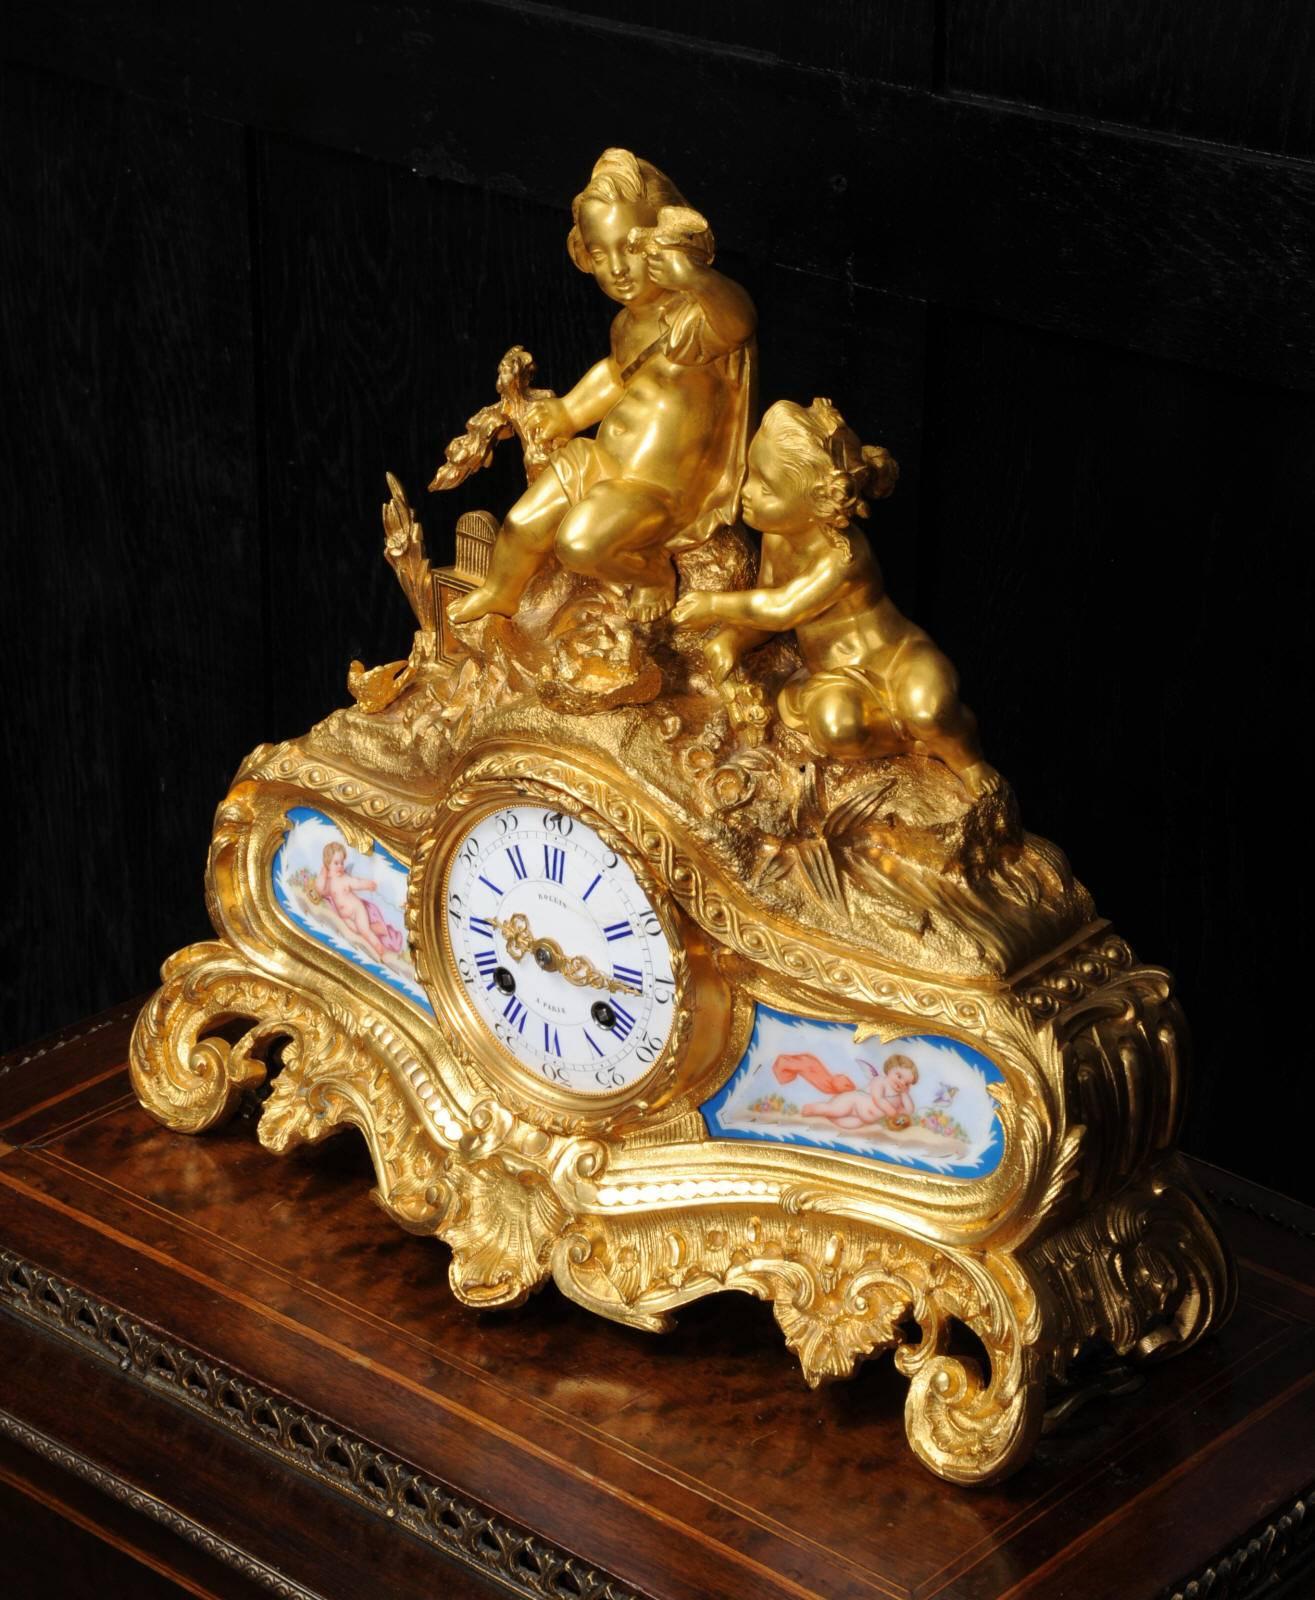 French Fine Early Ormolu and Sevres Porcelain Boudoir Clock, Japy Freres